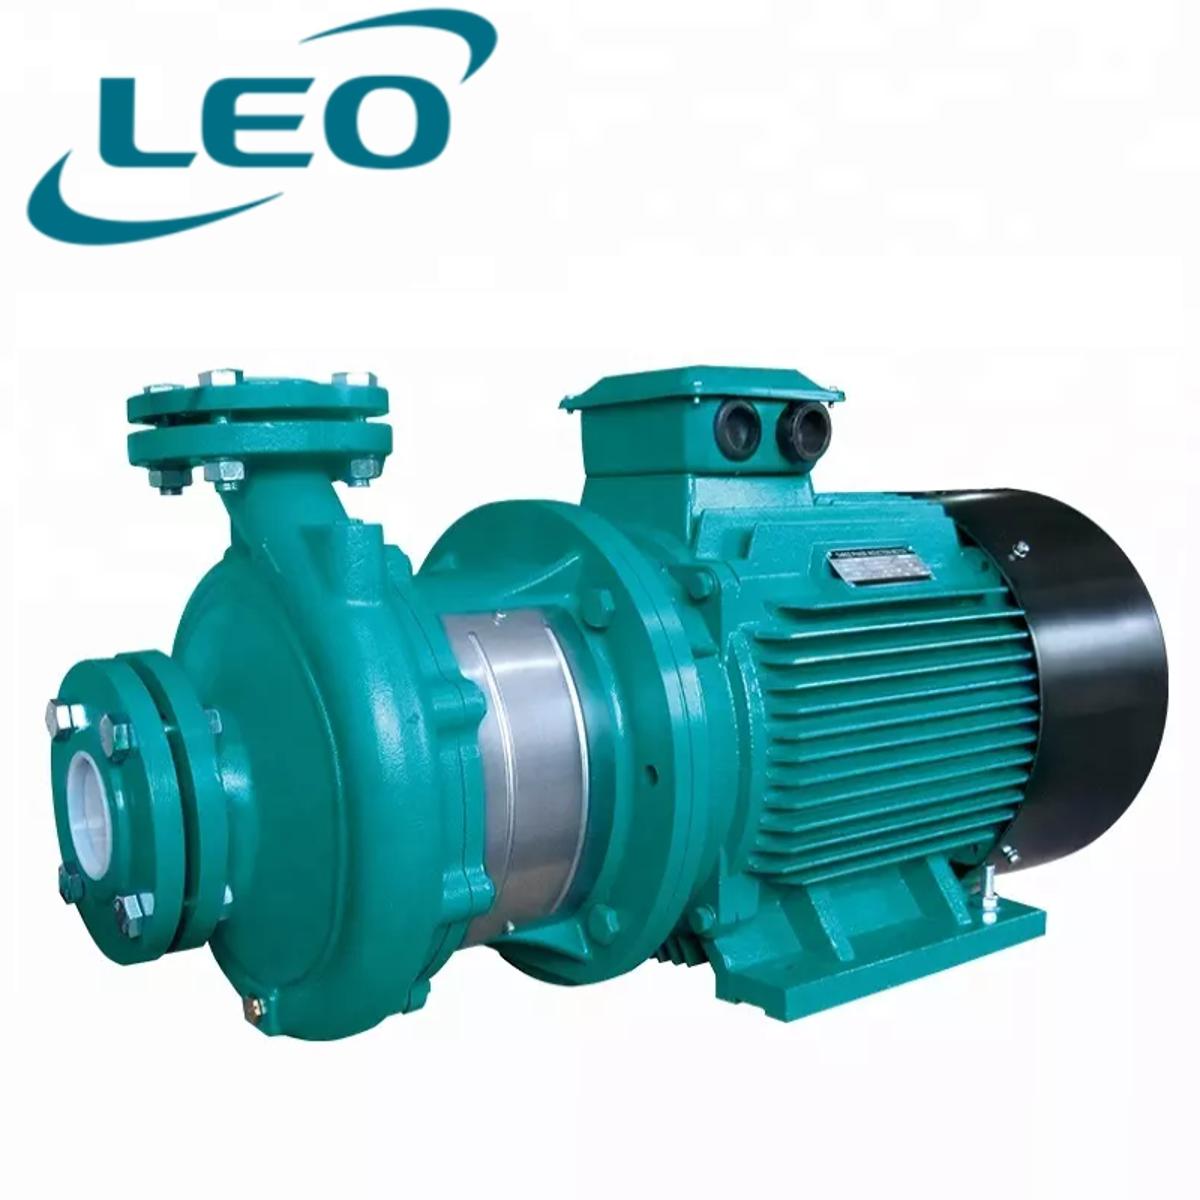 LEO - XST-65-200-150 - 15000 W - 20 HP - Clean Water HEAVY DUTY Centrifugal Pump With FLANGES  - 380V~400V THREE PHASE - SIZE :- 3" x 2 1-2 " - European STANDARD